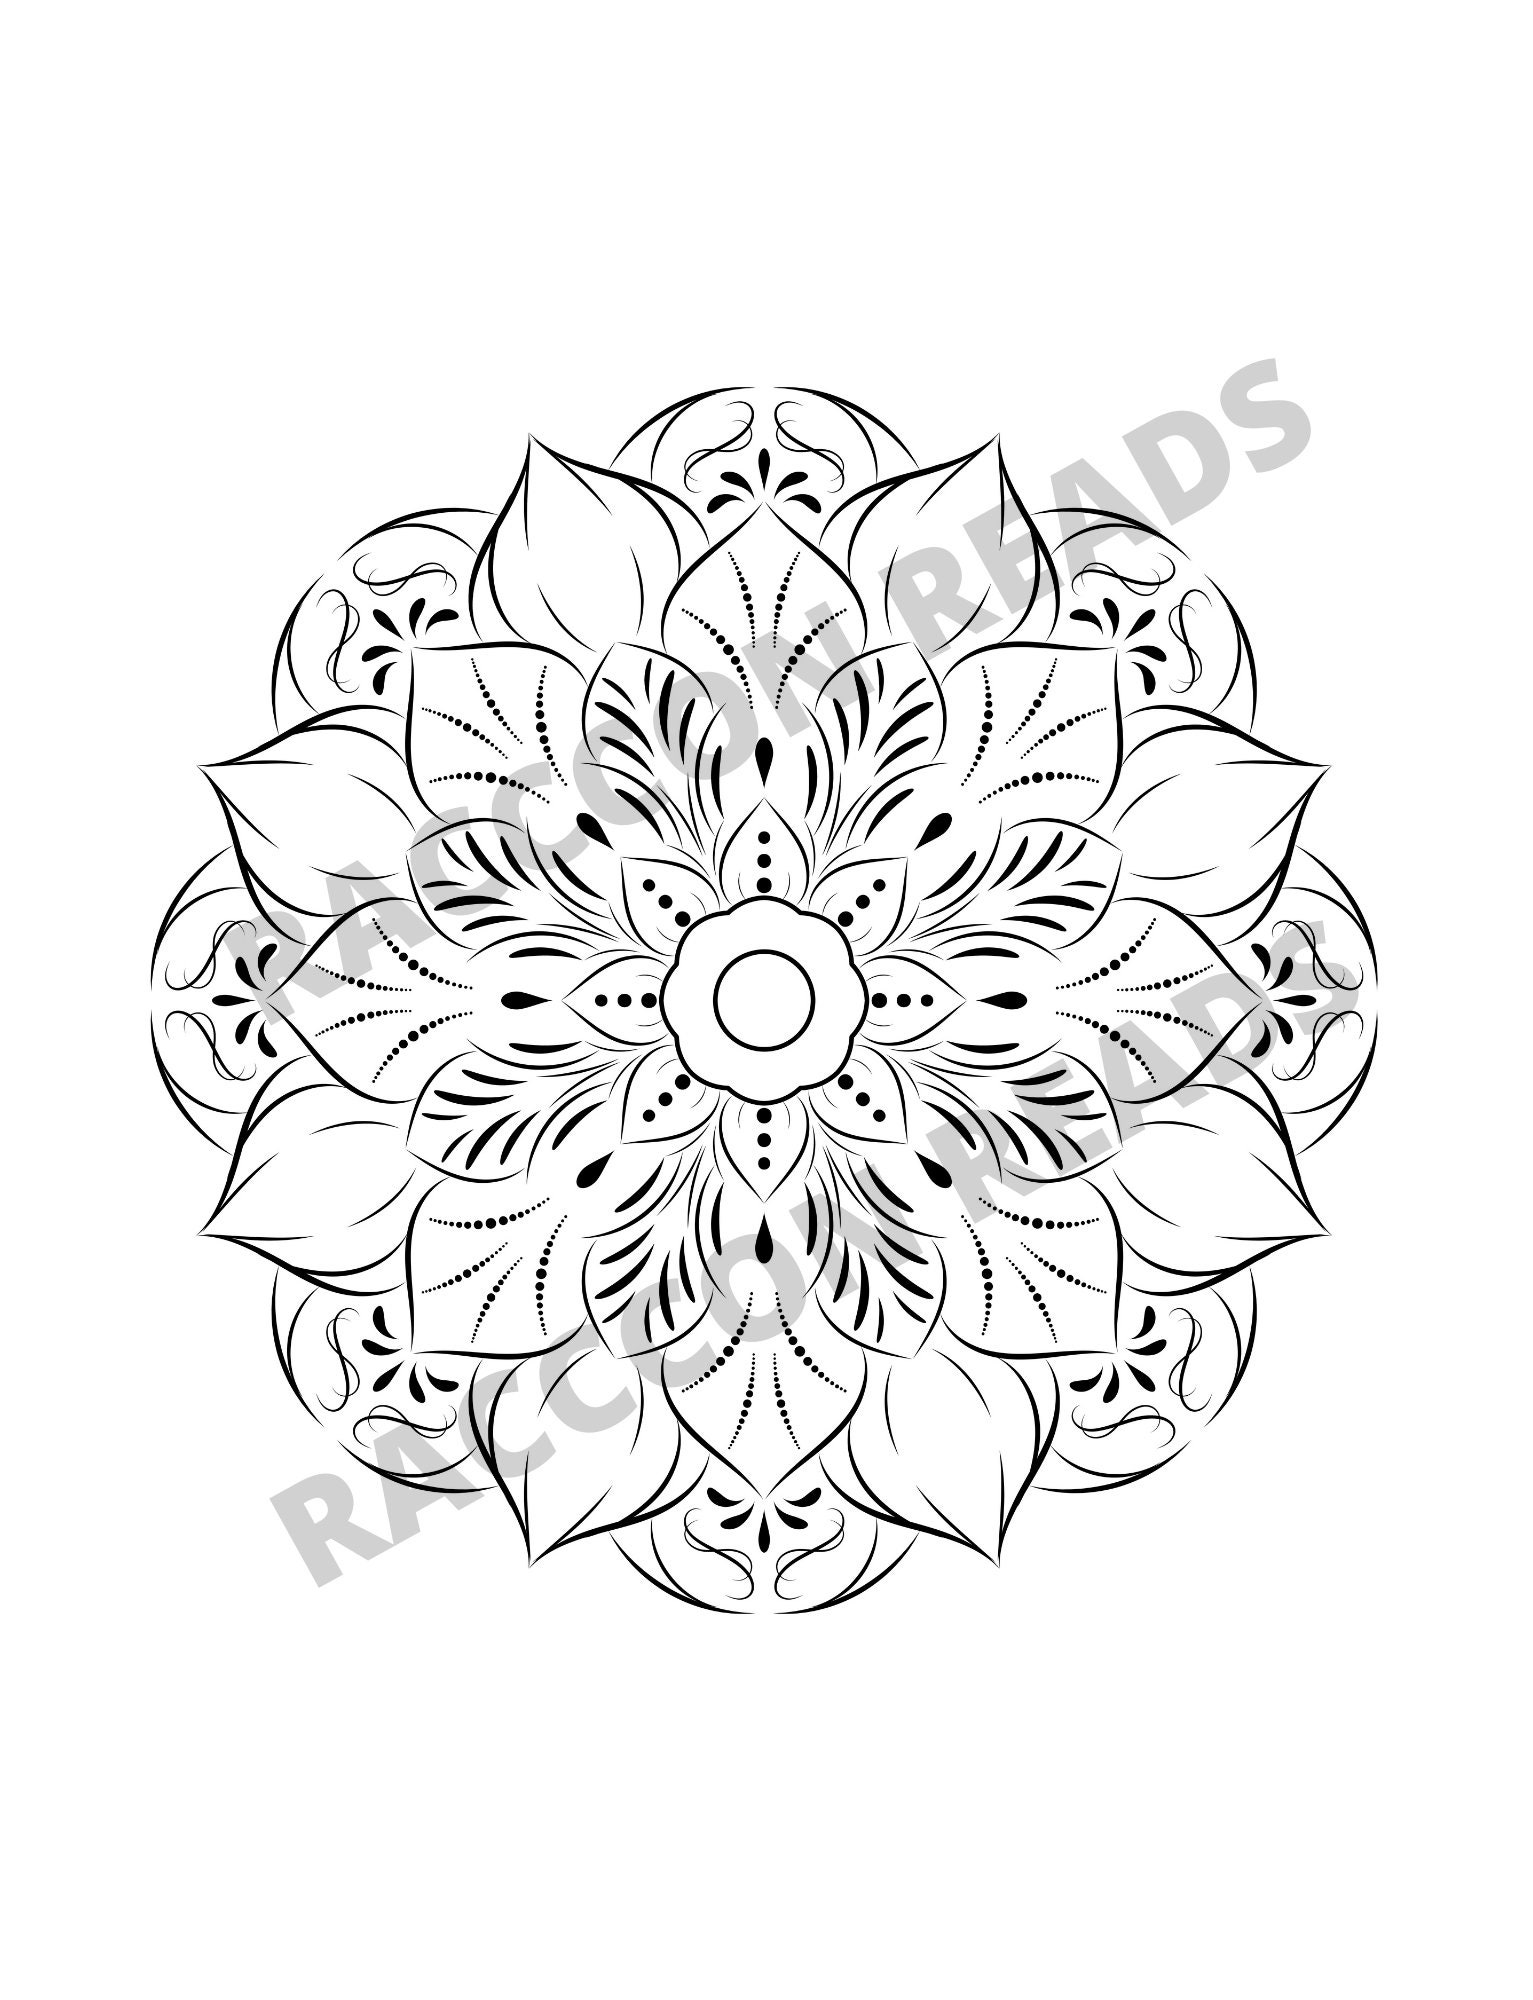 Mandala Coloring Pages PDF Digital Coloring Book for Adults | Etsy